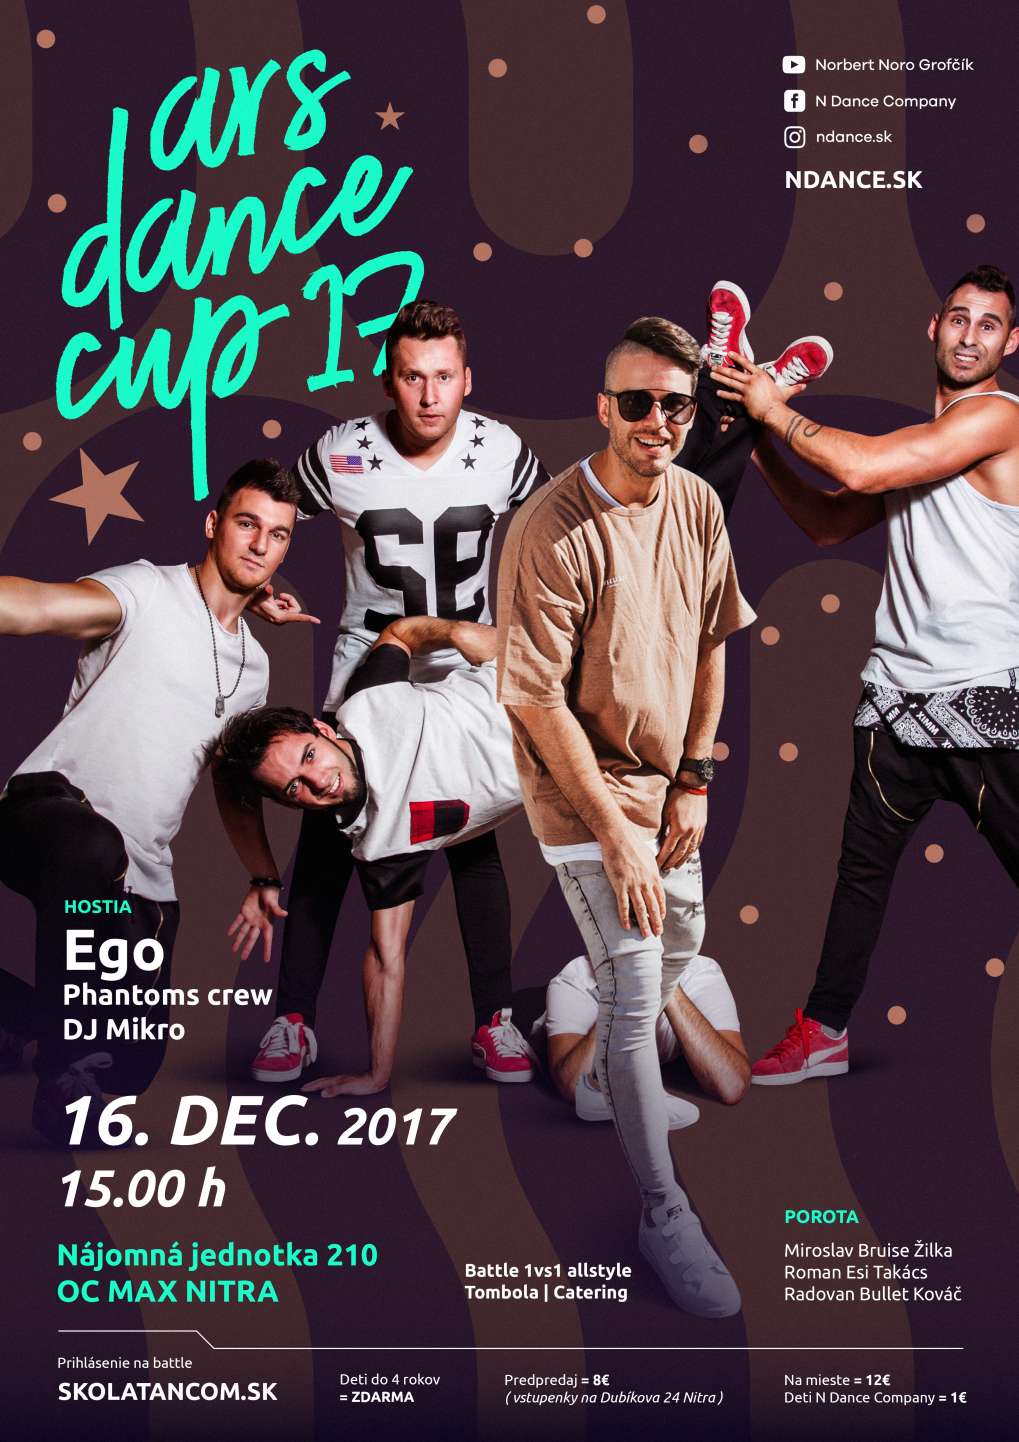 ARS DANCE CUP 2017